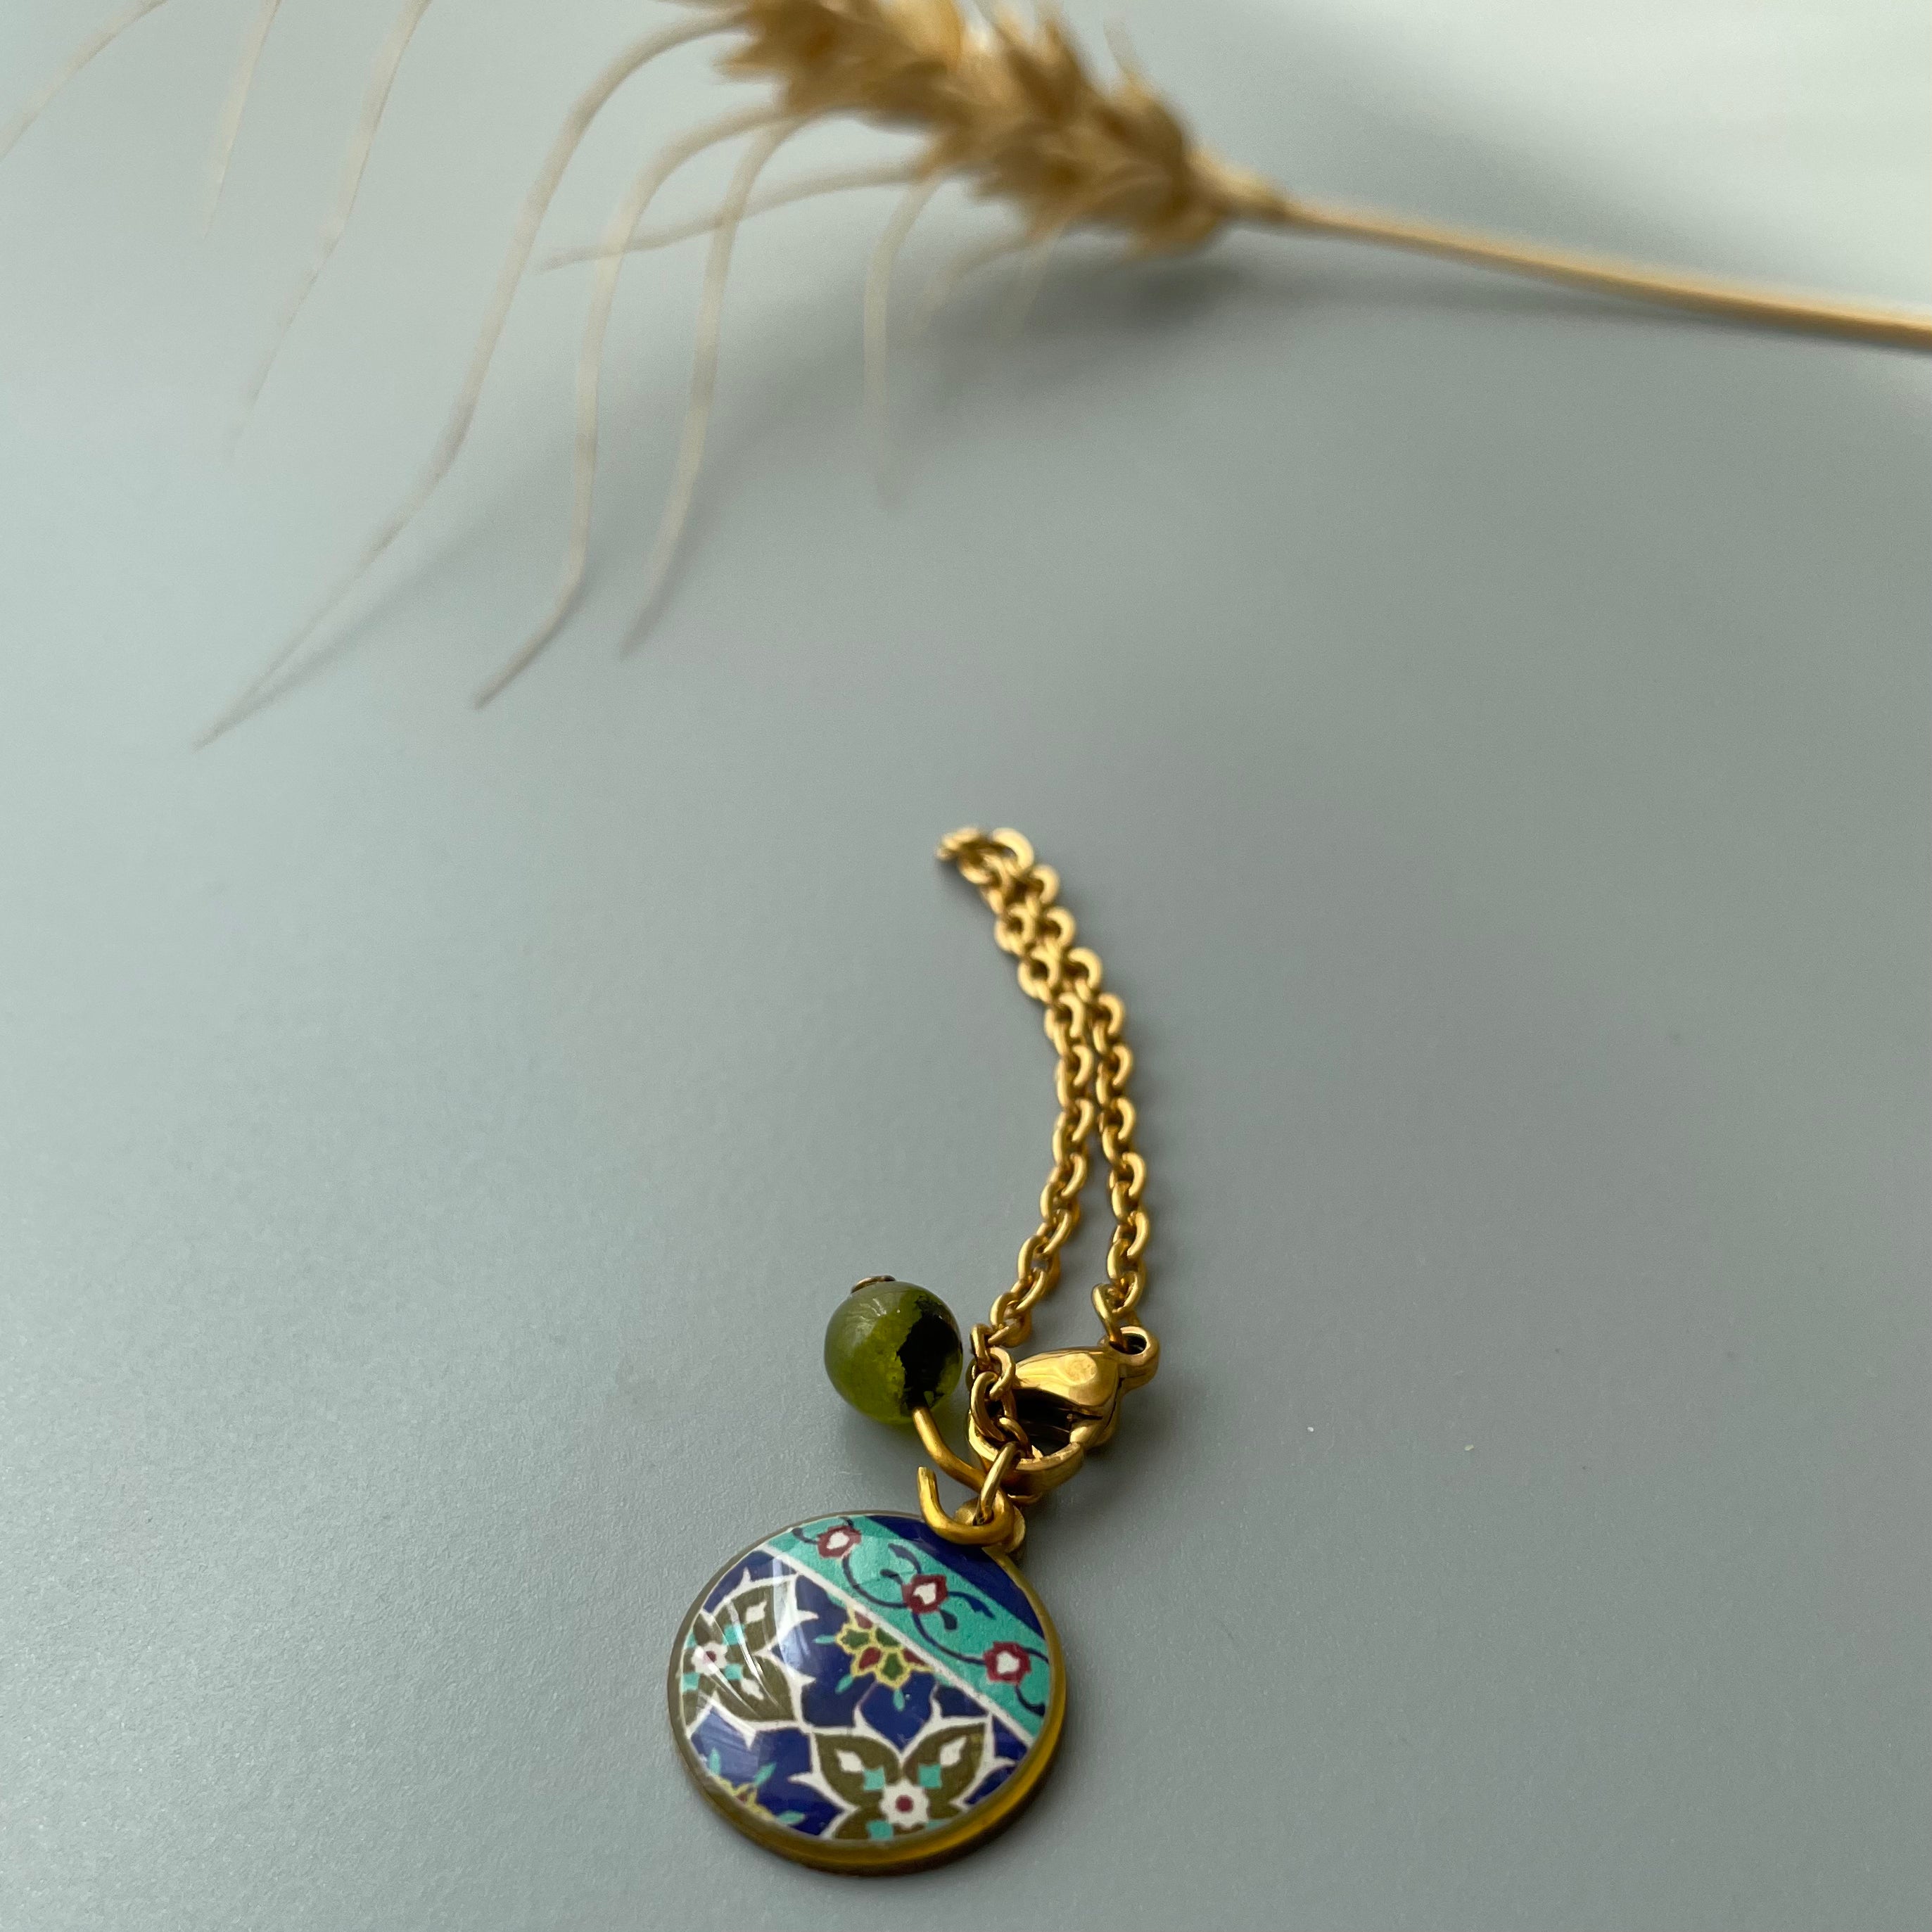 Persian Watch Charm with Colorful Design - AFRA ART GALLERY